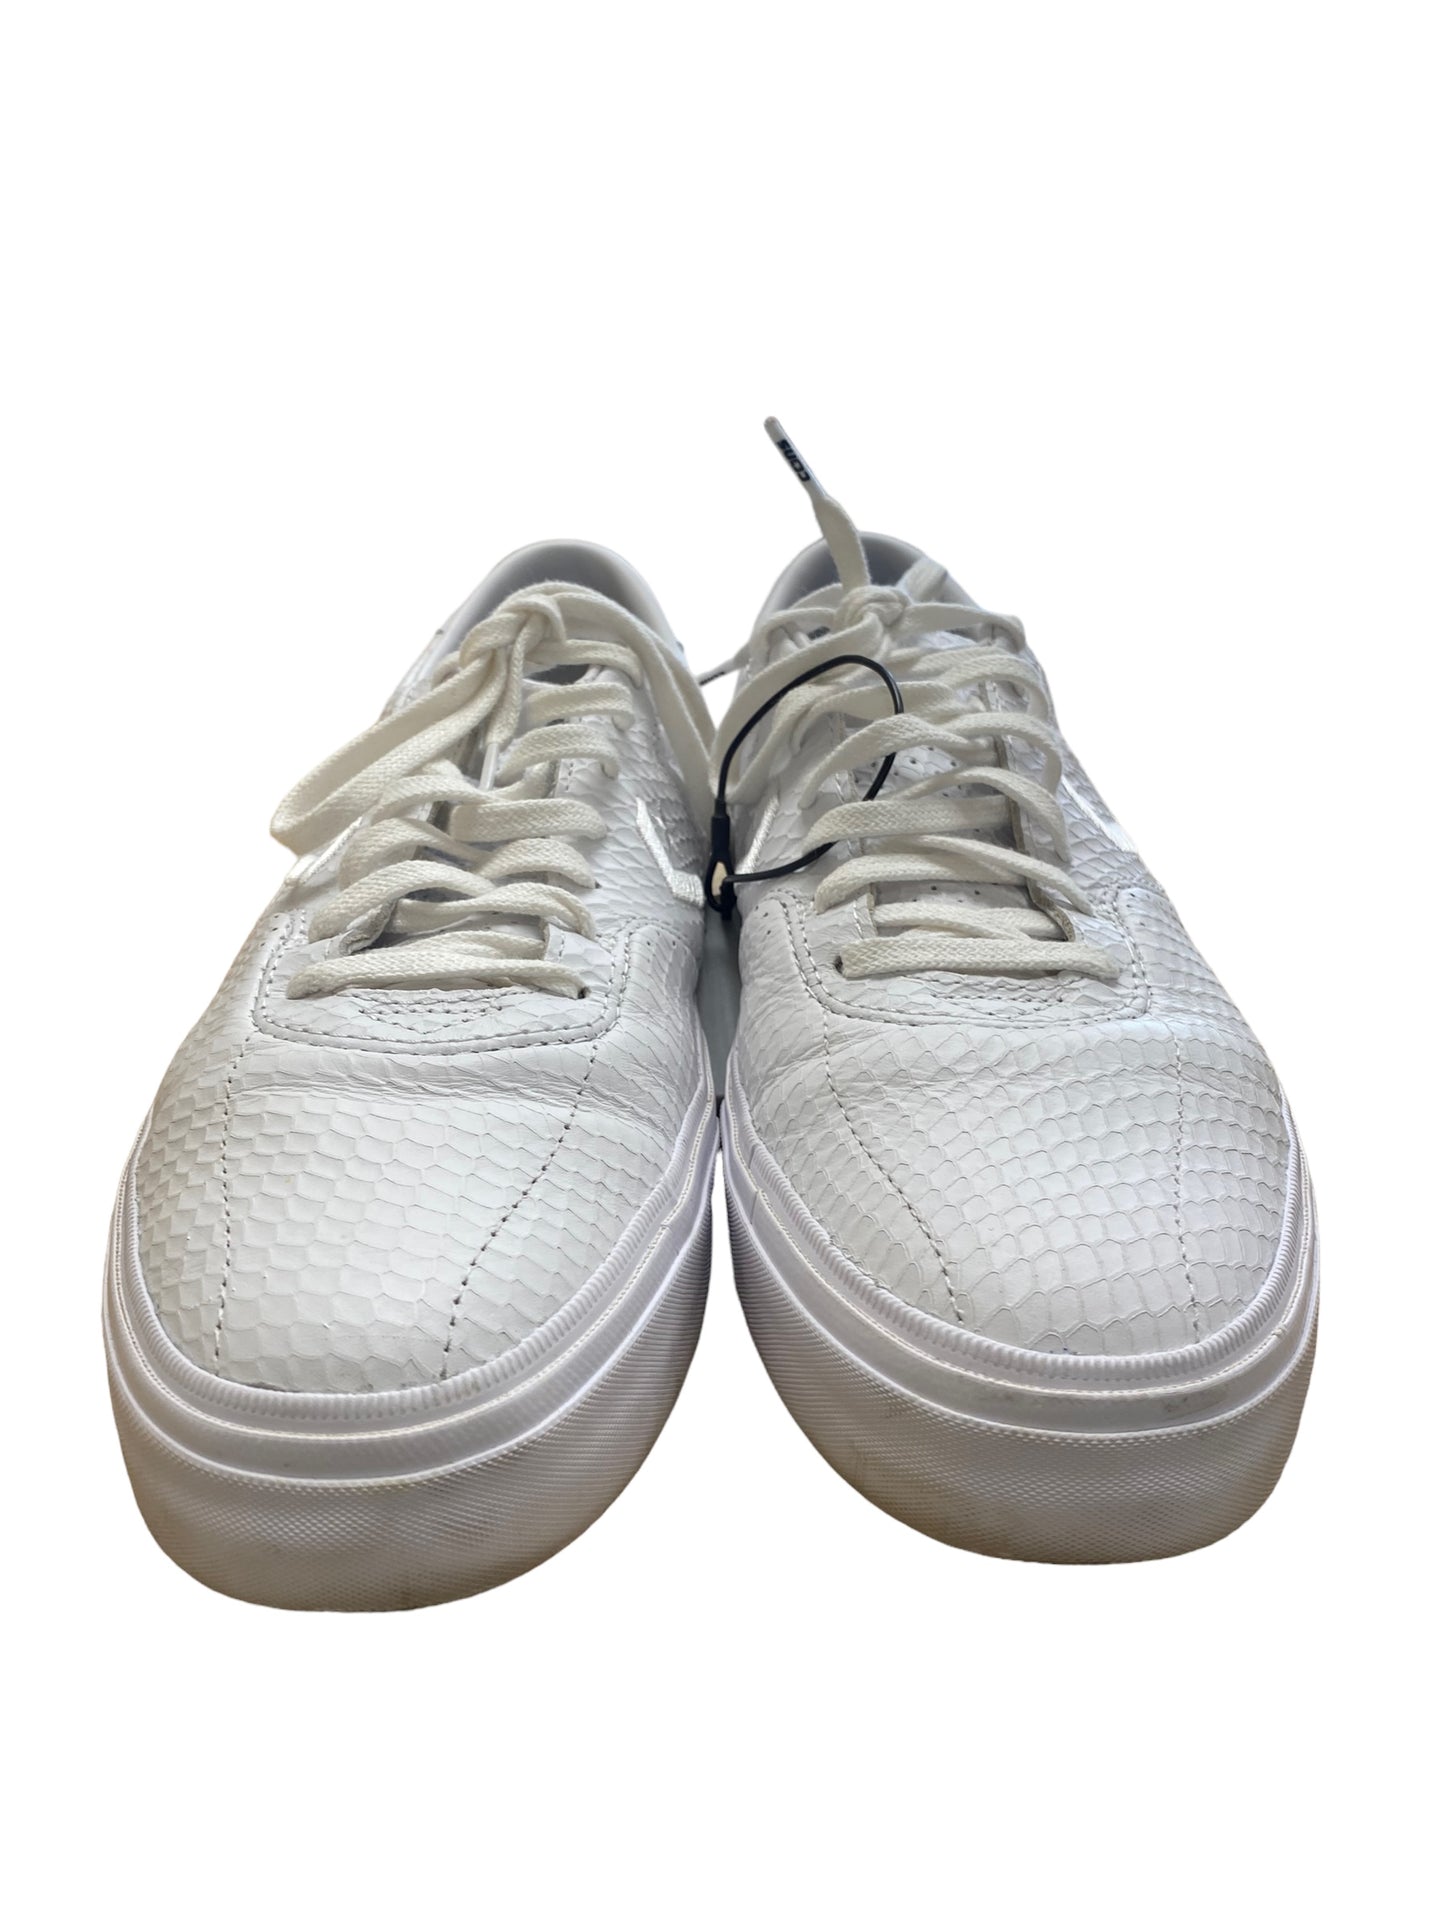 Shoes Athletic By Converse  Size: 12